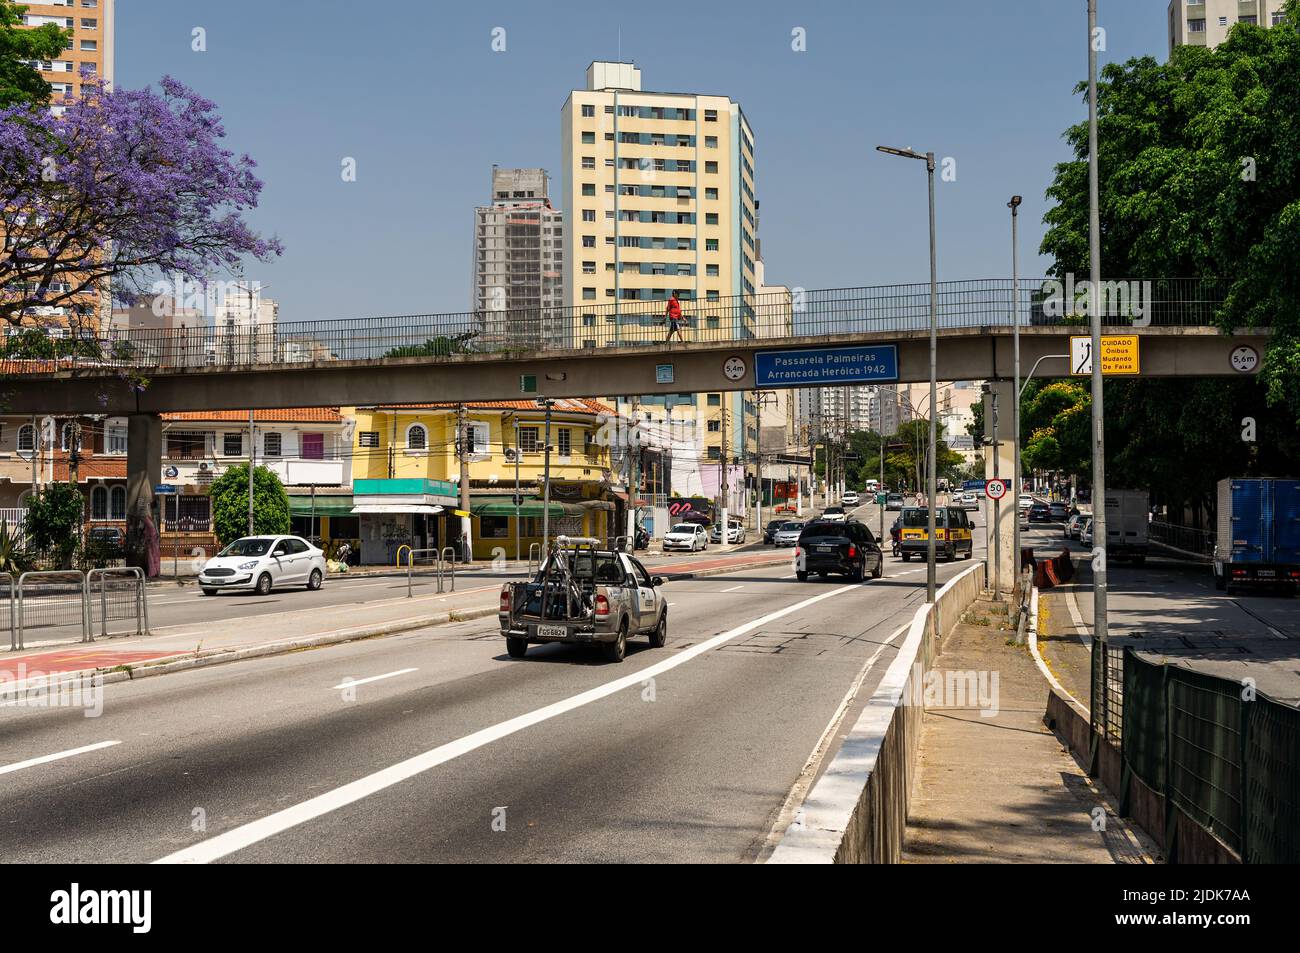 Normal business day traffic passing by Antartica avenue and Palmeiras Arrancada Historica 1942 footbridge under clear blue sky in Agua Branca district Stock Photo